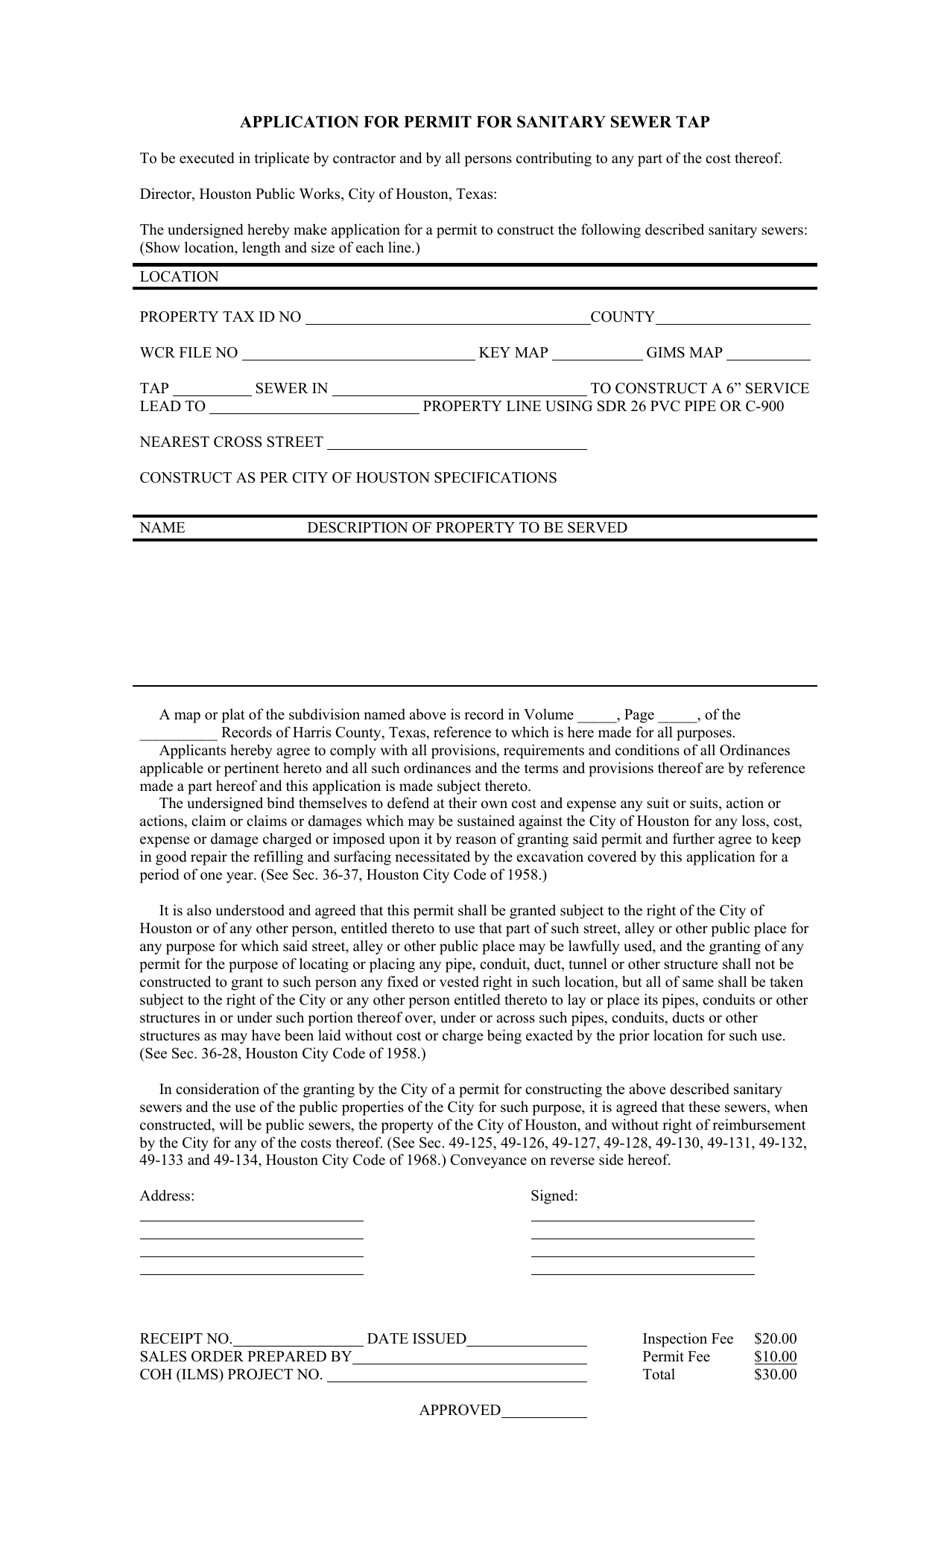 Application for Permit for Sanitary Sewer Tap - City of Houston, Texas, Page 1